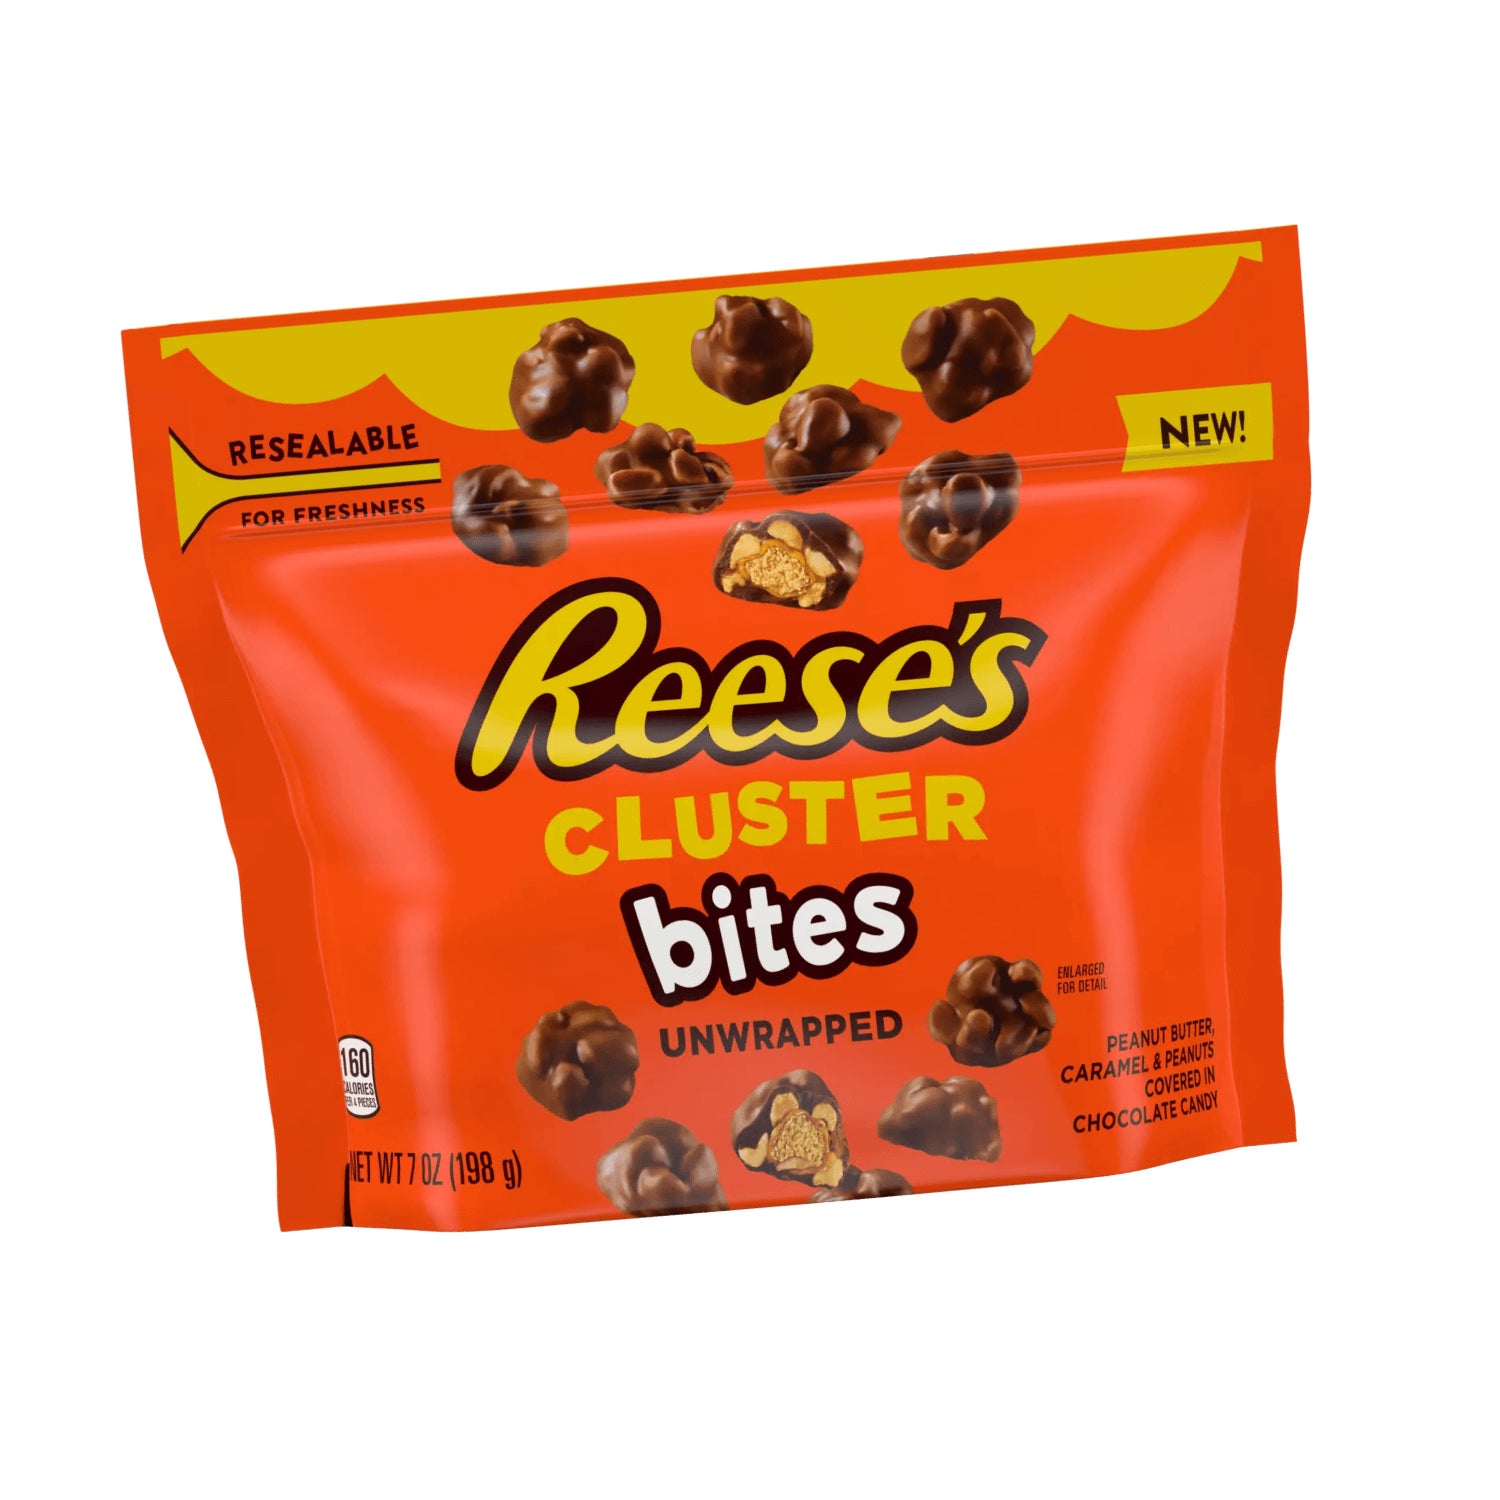 bag of Reese's Cluster Bites PEanut Butter, Caramel and Peanuts Candy